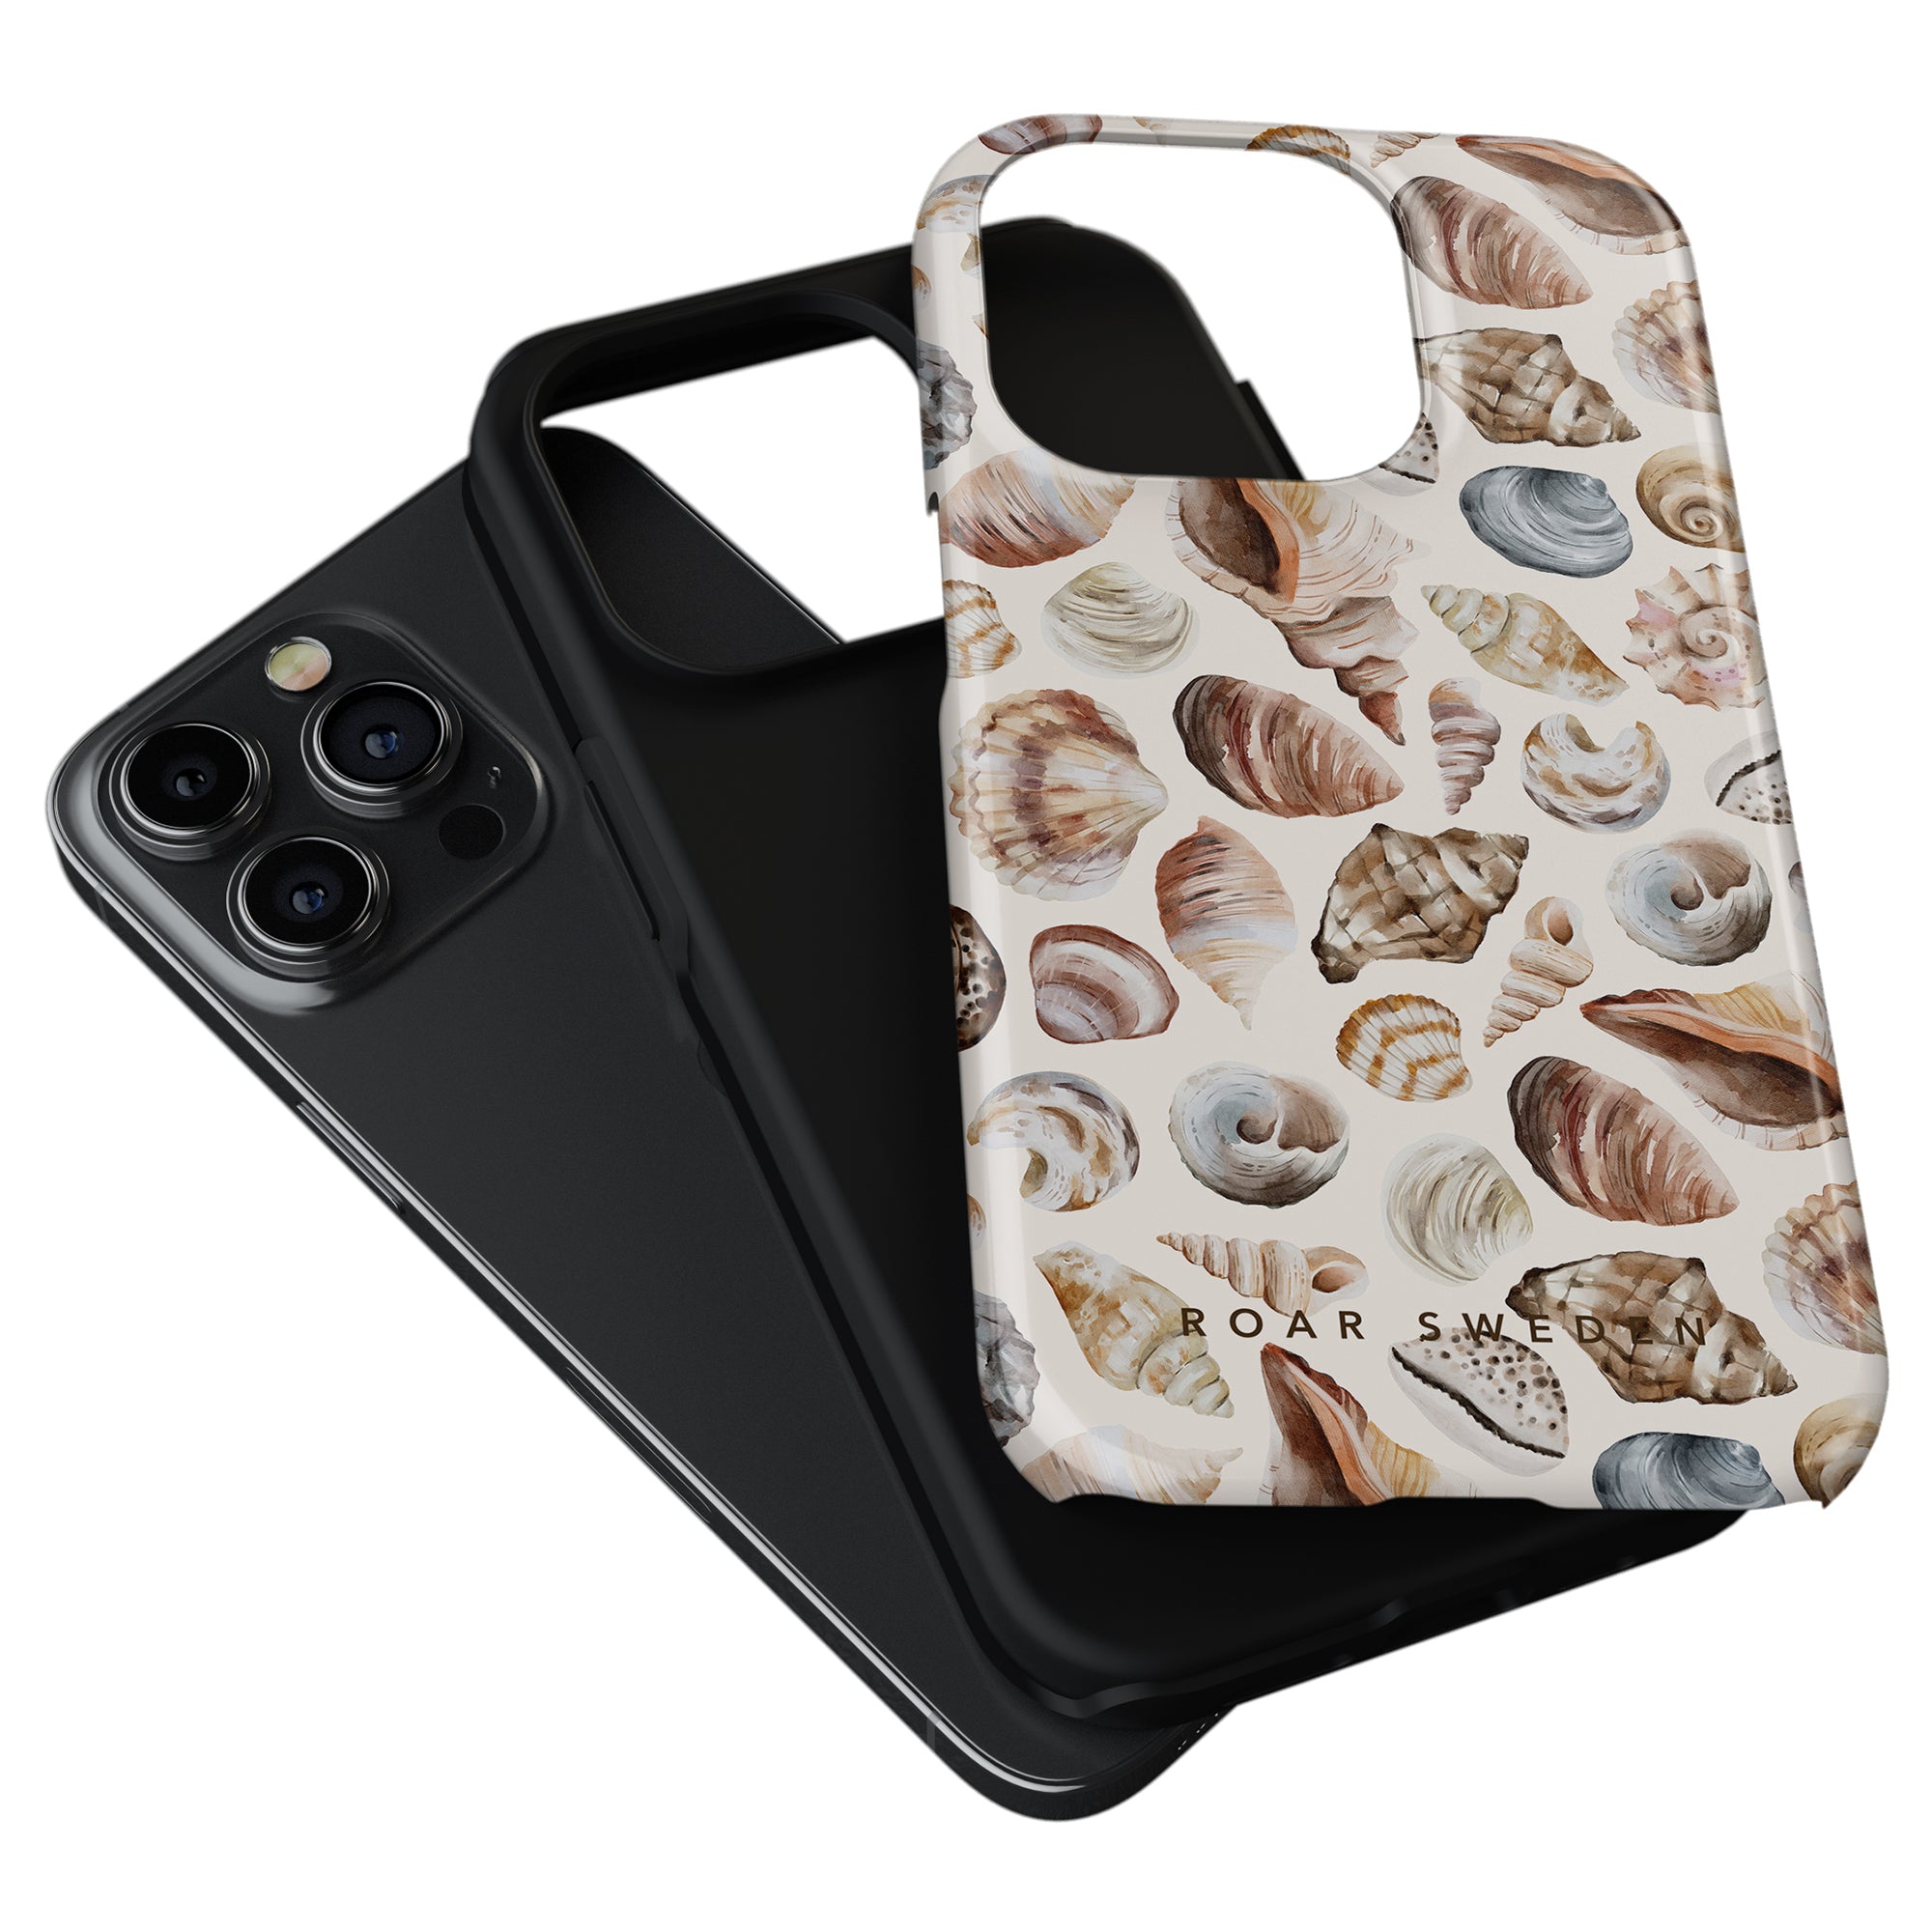 Two Beach Shells - Tough Cases from the ocean collection with seashell designs, one fitted on a smartphone with a triple-camera setup.